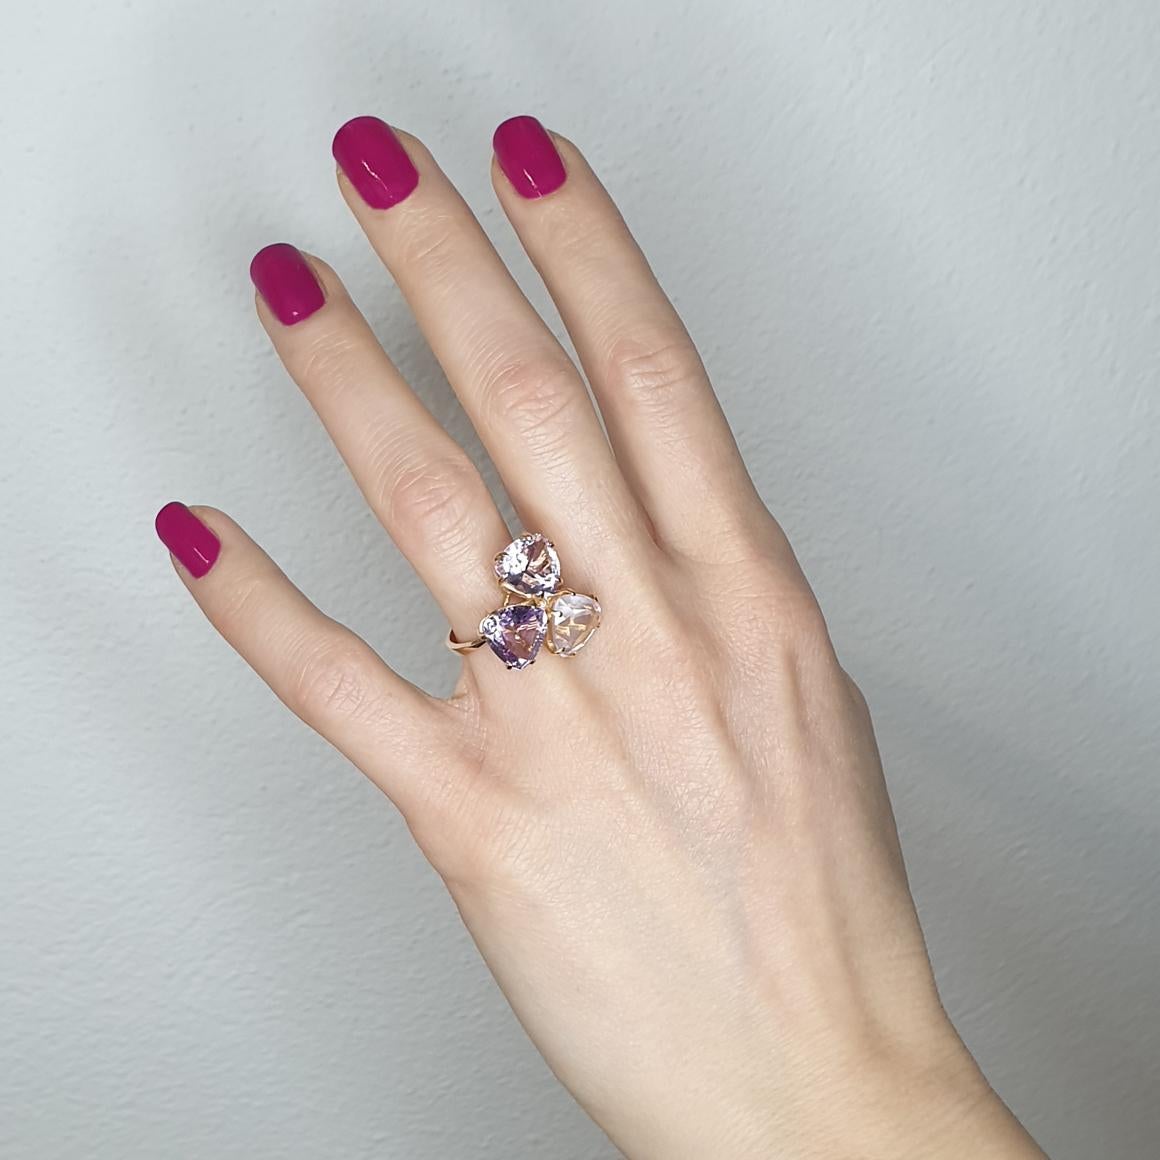 Design, fashion, trandy ring in 18k rose gold with Amethyst (triangular cut, size: mm) and pink Quartz (triangular cut, size: mm)  g.7,30

Size of ring: 12 EU  -  6,5 USA 

All Stanoppi Jewelry is new and has never been previously owned or worn.